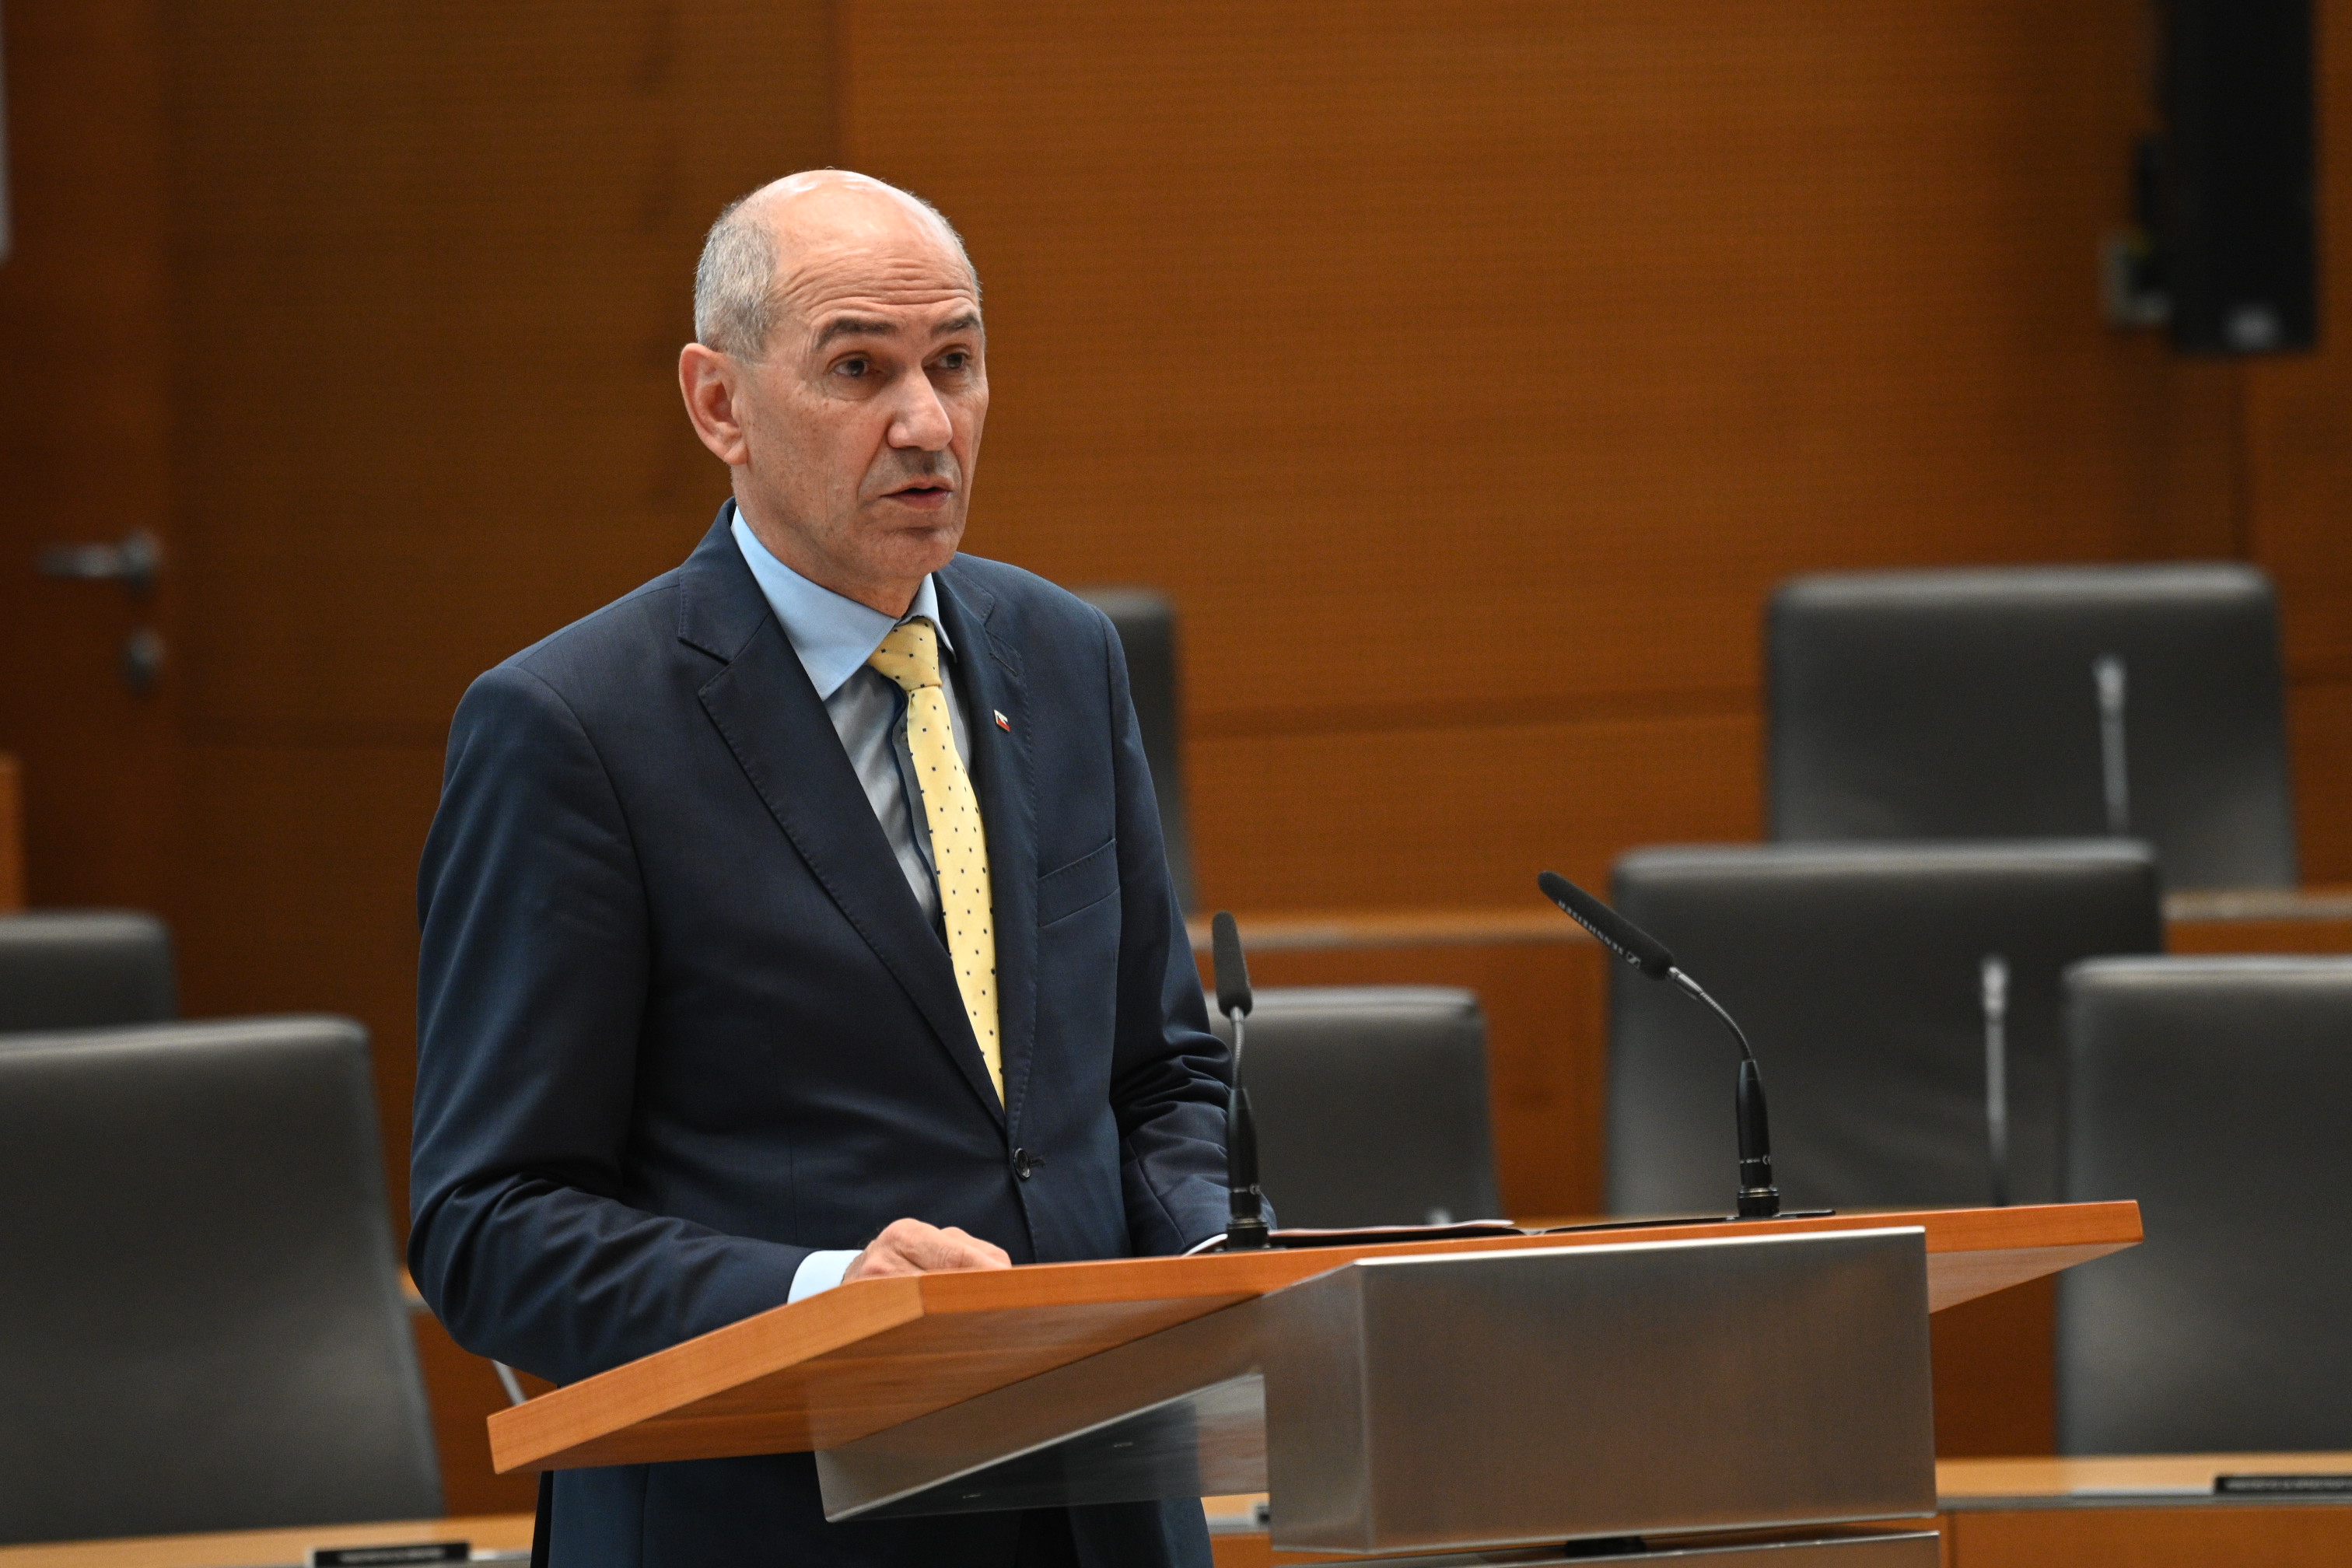 Prime Minister Janez Janša: The 2022 and 2023 budgets are optimistic ...